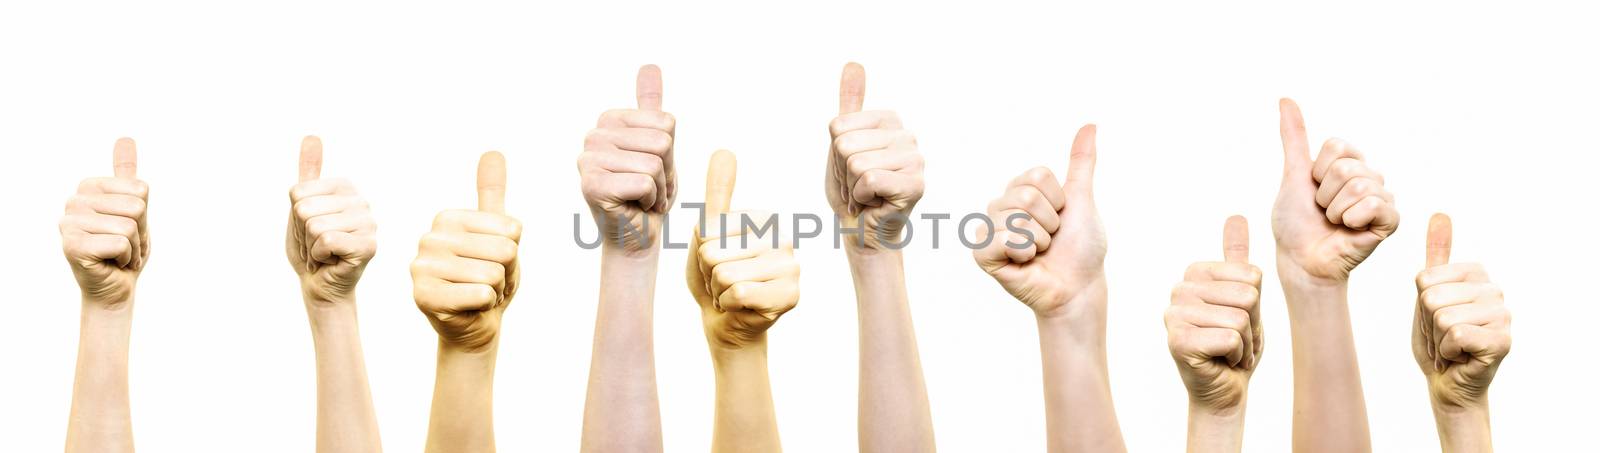 Group of young people showing thumbs up gesture on a white background